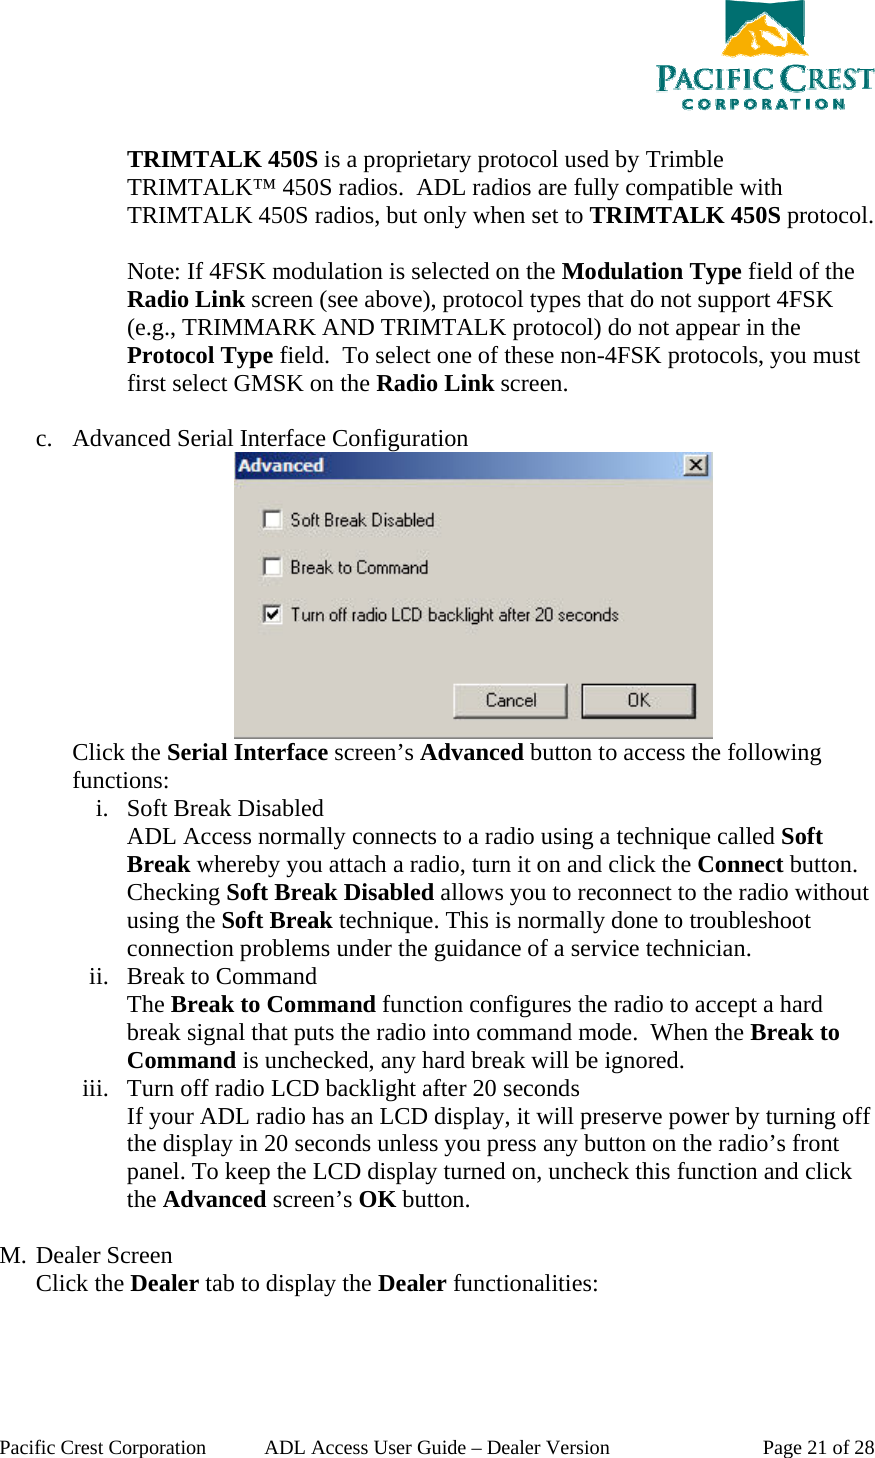  Pacific Crest Corporation  ADL Access User Guide – Dealer Version  Page 21 of 28  TRIMTALK 450S is a proprietary protocol used by Trimble TRIMTALK™ 450S radios.  ADL radios are fully compatible with TRIMTALK 450S radios, but only when set to TRIMTALK 450S protocol.  Note: If 4FSK modulation is selected on the Modulation Type field of the Radio Link screen (see above), protocol types that do not support 4FSK (e.g., TRIMMARK AND TRIMTALK protocol) do not appear in the Protocol Type field.  To select one of these non-4FSK protocols, you must first select GMSK on the Radio Link screen.  c. Advanced Serial Interface Configuration  Click the Serial Interface screen’s Advanced button to access the following functions: i. Soft Break Disabled ADL Access normally connects to a radio using a technique called Soft Break whereby you attach a radio, turn it on and click the Connect button. Checking Soft Break Disabled allows you to reconnect to the radio without using the Soft Break technique. This is normally done to troubleshoot connection problems under the guidance of a service technician. ii. Break to Command The Break to Command function configures the radio to accept a hard break signal that puts the radio into command mode.  When the Break to Command is unchecked, any hard break will be ignored. iii. Turn off radio LCD backlight after 20 seconds If your ADL radio has an LCD display, it will preserve power by turning off the display in 20 seconds unless you press any button on the radio’s front panel. To keep the LCD display turned on, uncheck this function and click the Advanced screen’s OK button.  M. Dealer Screen Click the Dealer tab to display the Dealer functionalities: 